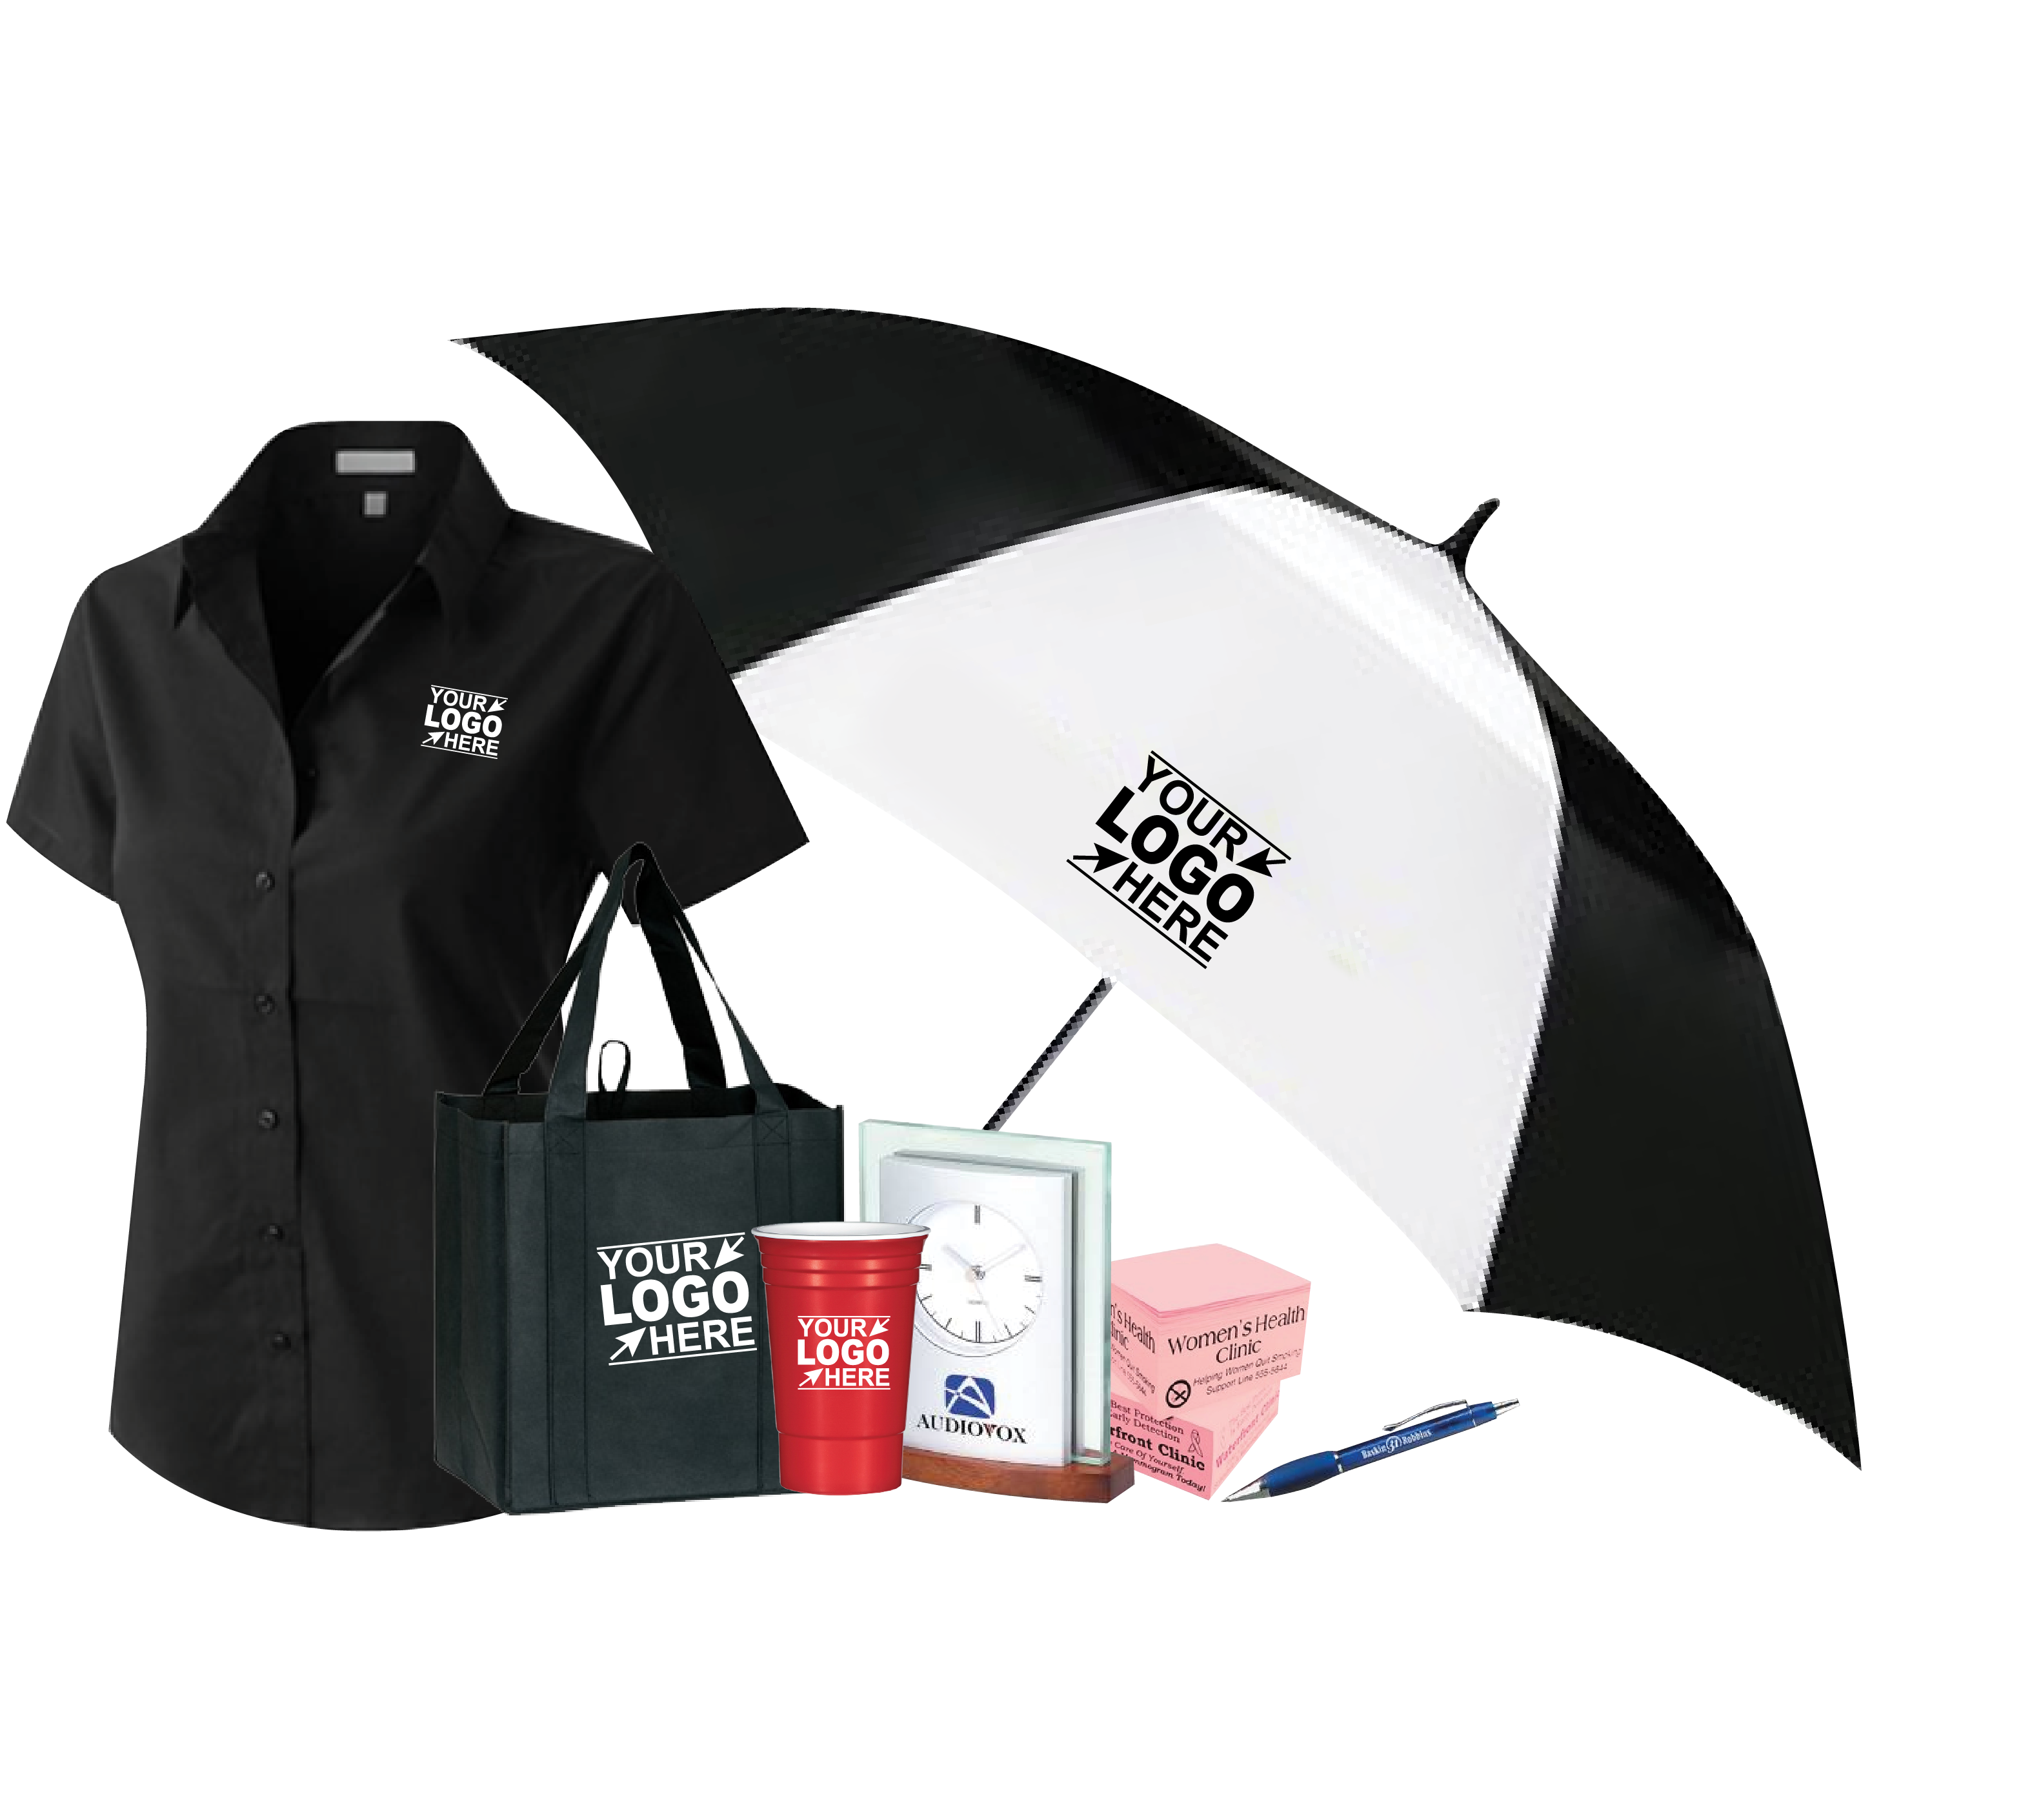 What are Promotional Products?